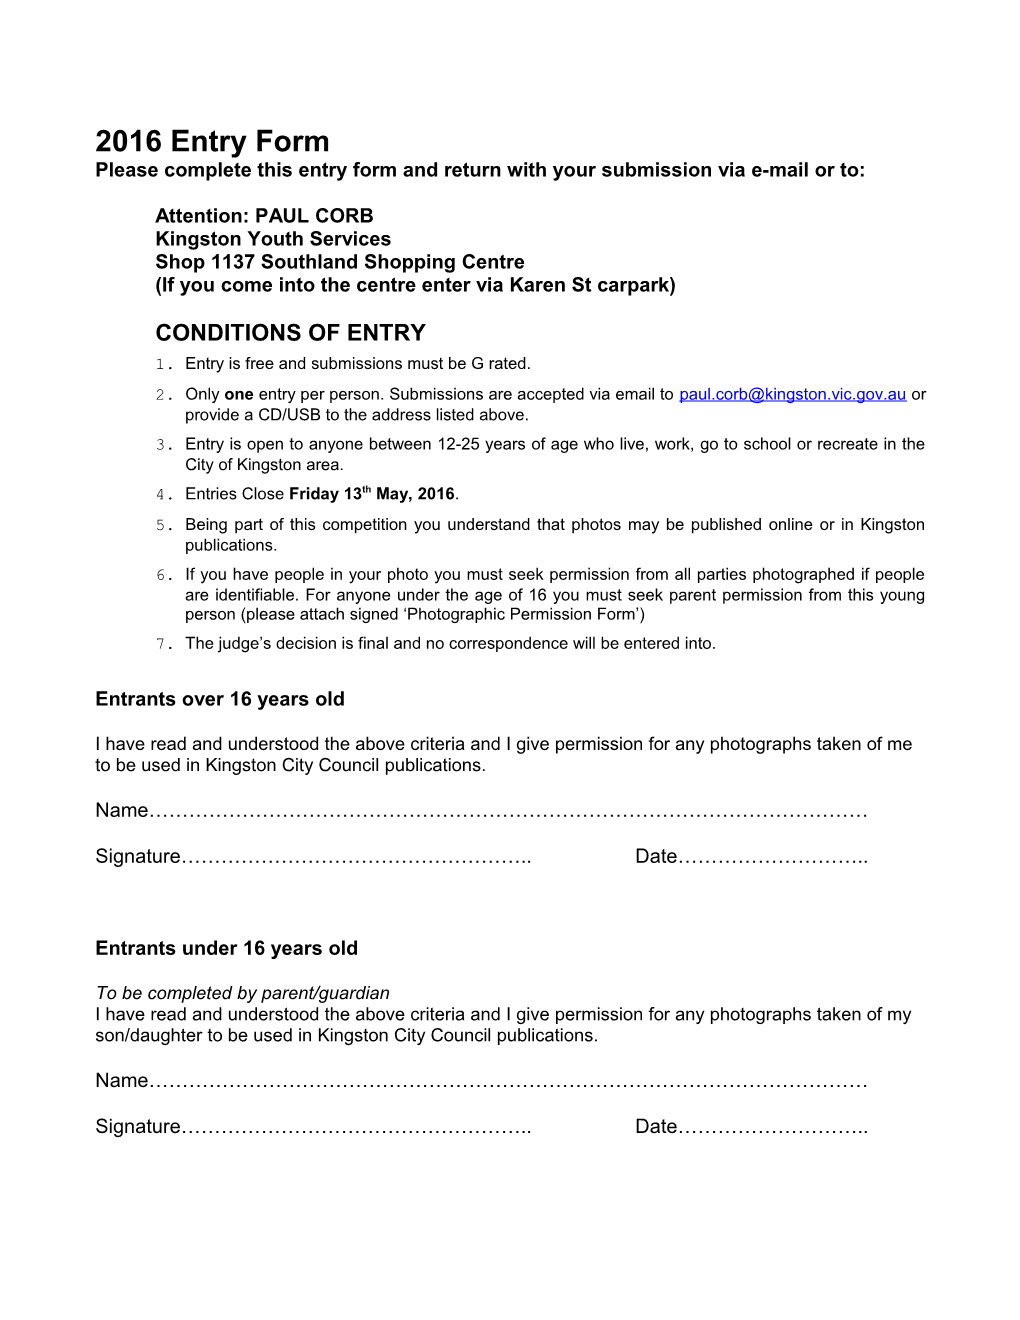 Please Complete This Entry Form and Return with Your Submission Via E-Mail Or To